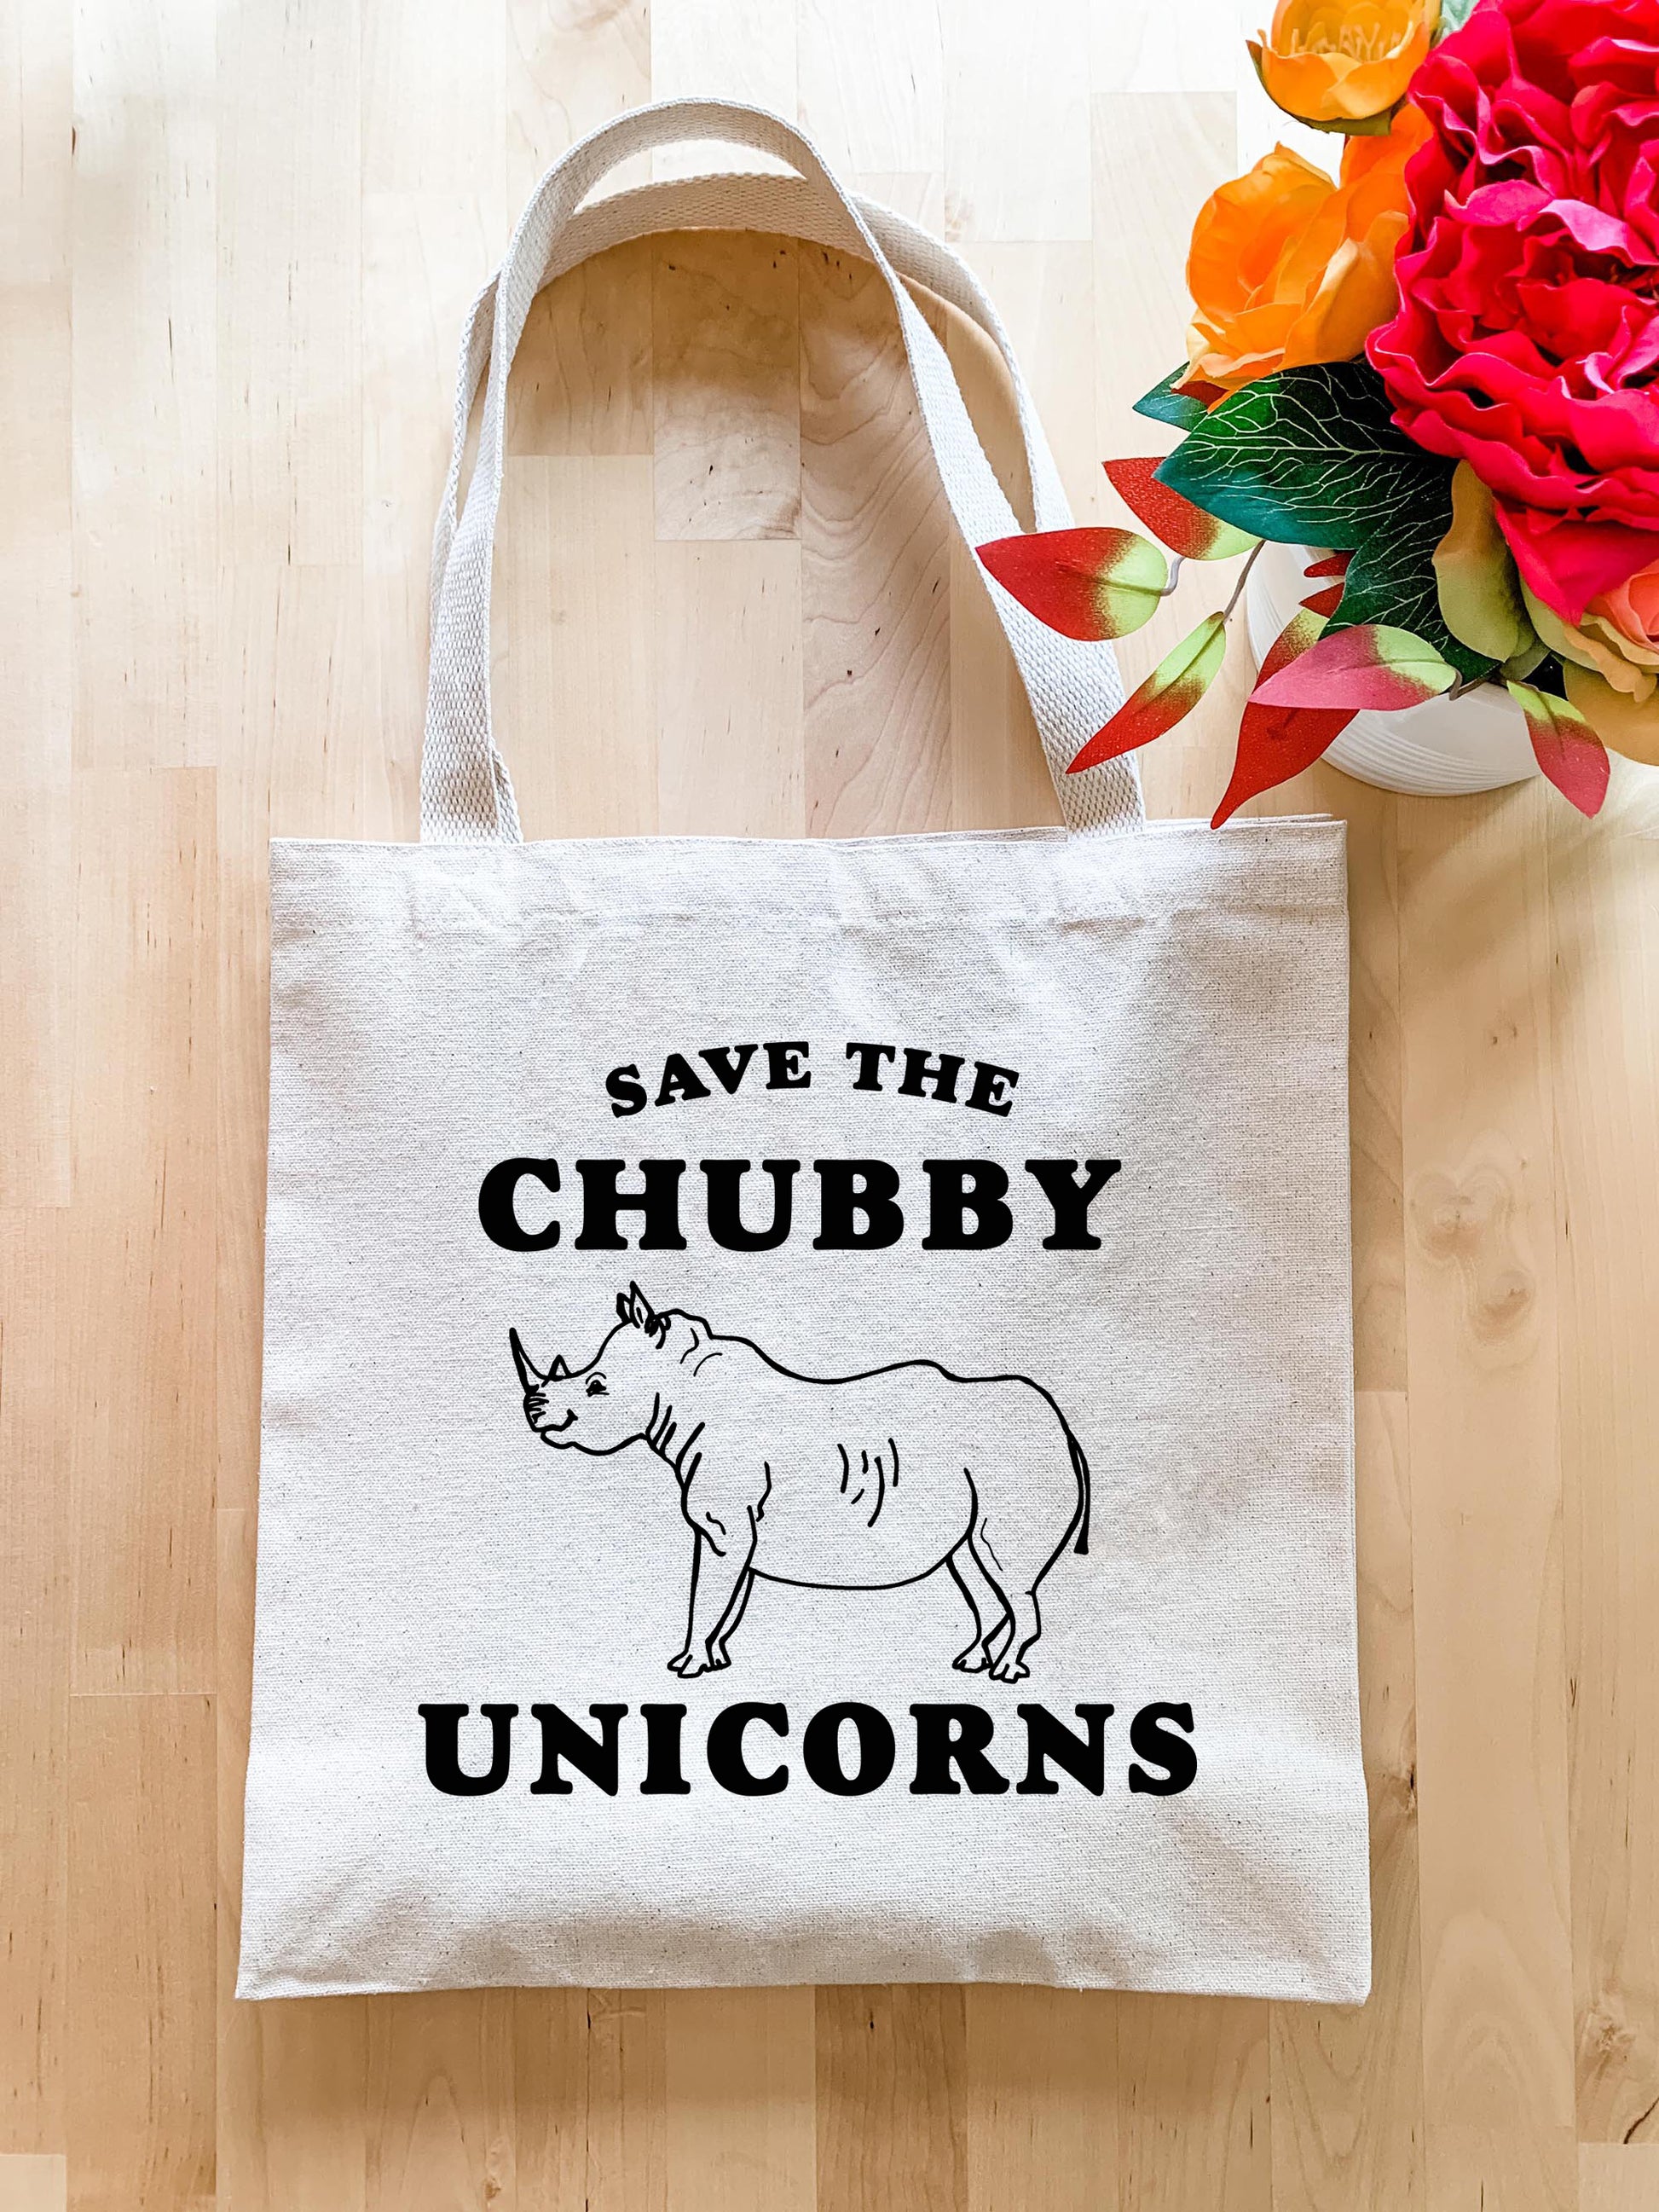 Save The Chubby Unicorns - Tote Bag - MoonlightMakers